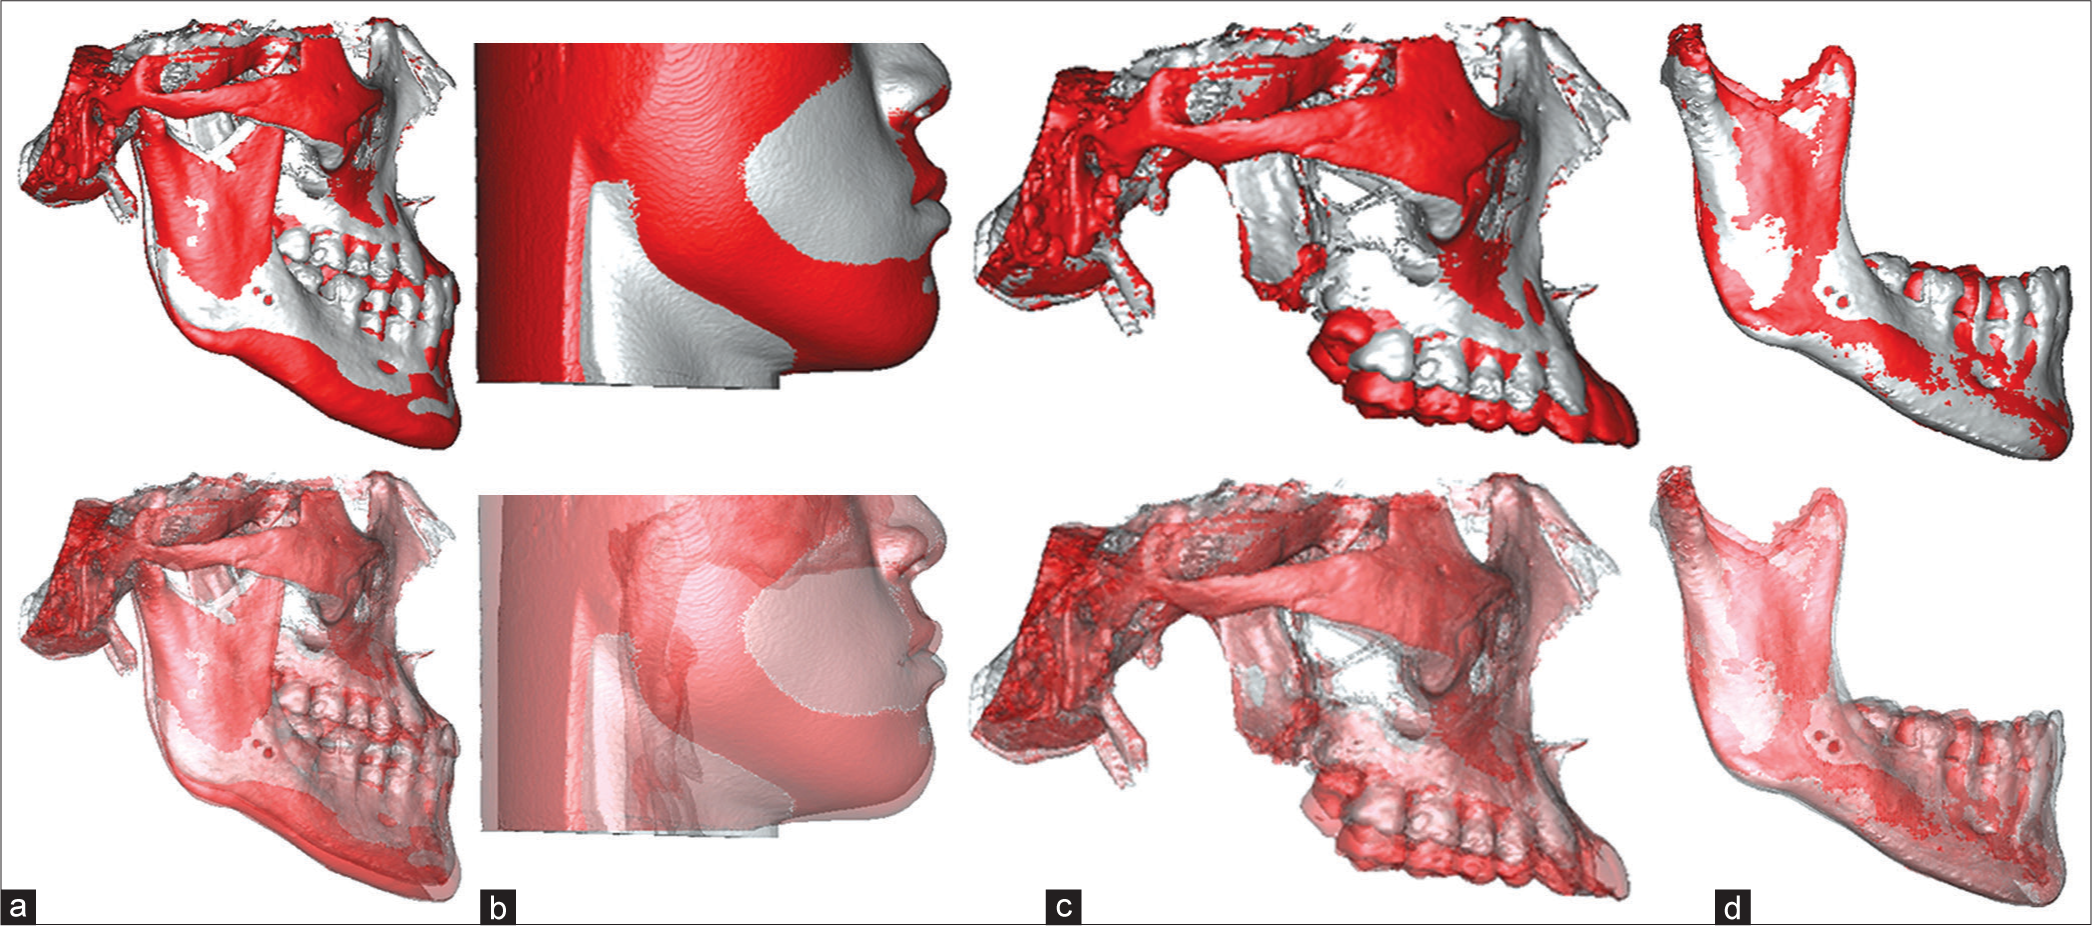 The three-dimensional superimpositions of the pretreatment (silver-gray color) and posttreatment (red color) cone-beam computer tomography images of the Technique-2 case report in Figure 3. (a) The overall skeletal superimposition on cranial base revealed the mandible was clockwise rotated 0.9°, downward 3.7 mm, but forward 1.5 mm; (b) The overall soft-tissue superimposition based on overall skeletal superimposition on cranial base revealed the soft-tissue chin moved downward 4.5 mm but forward 1.3 mm due to inadequate clockwise rotation of mandible, growth of mandible, and no extrusion of lower dentition; (c) The cranial base superimposition without mandible revealed the maxillary dentition was extruded 0.9–6.6 mm; (d) The mandibular superimposition illustrated lower dentition was intruded 1.1–2.7 mm, and the mandibular condyle grew 3.7 mm